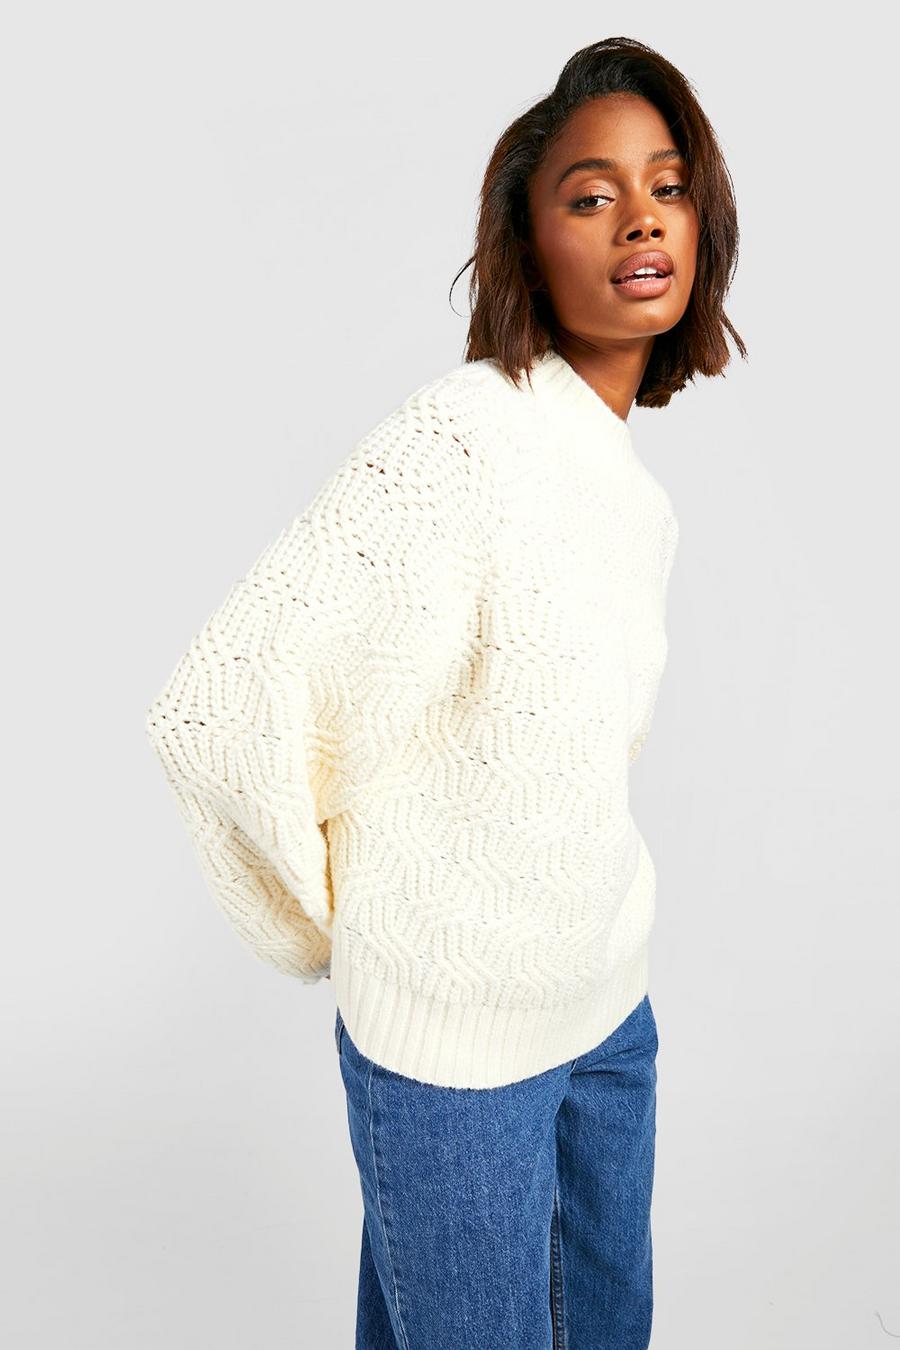 Women's Jumpers & Cardigans